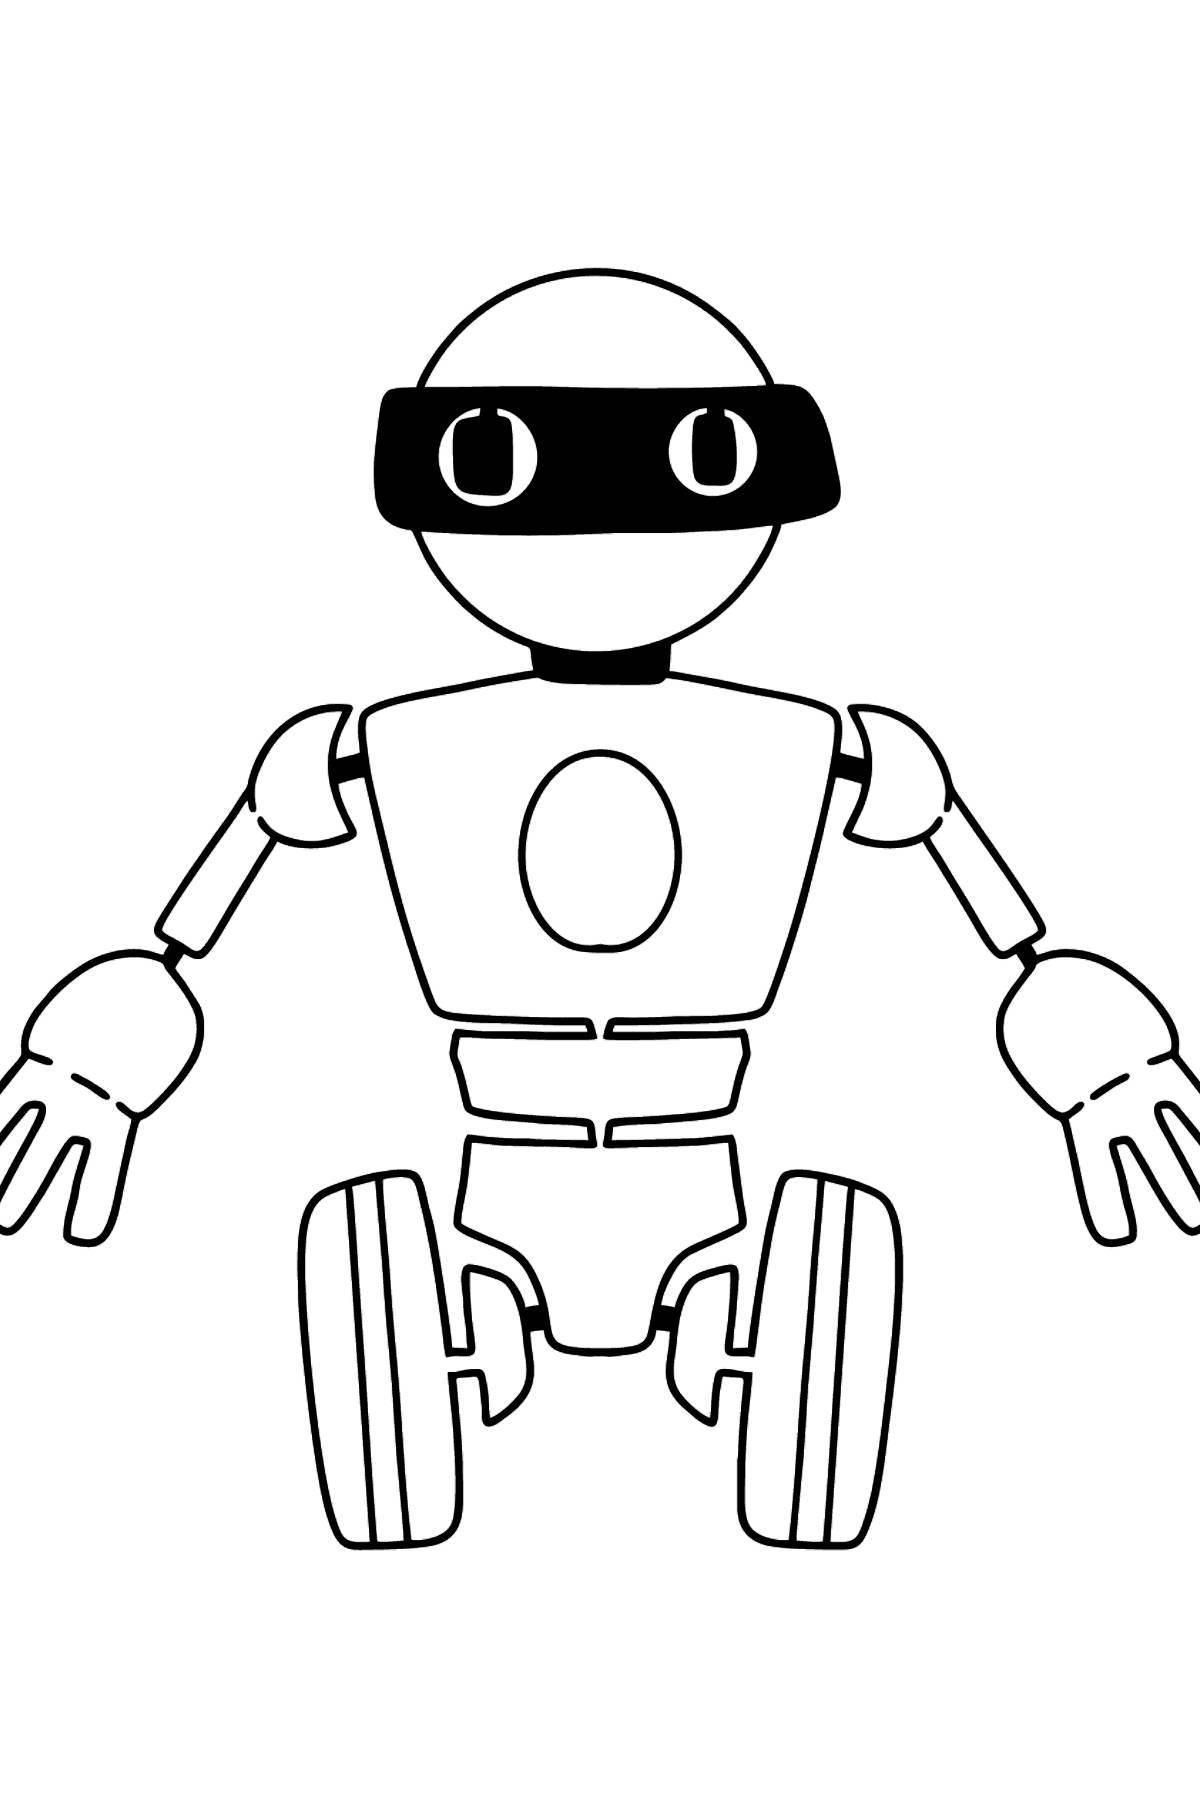 Joyful robot coloring book for 5-6 year olds